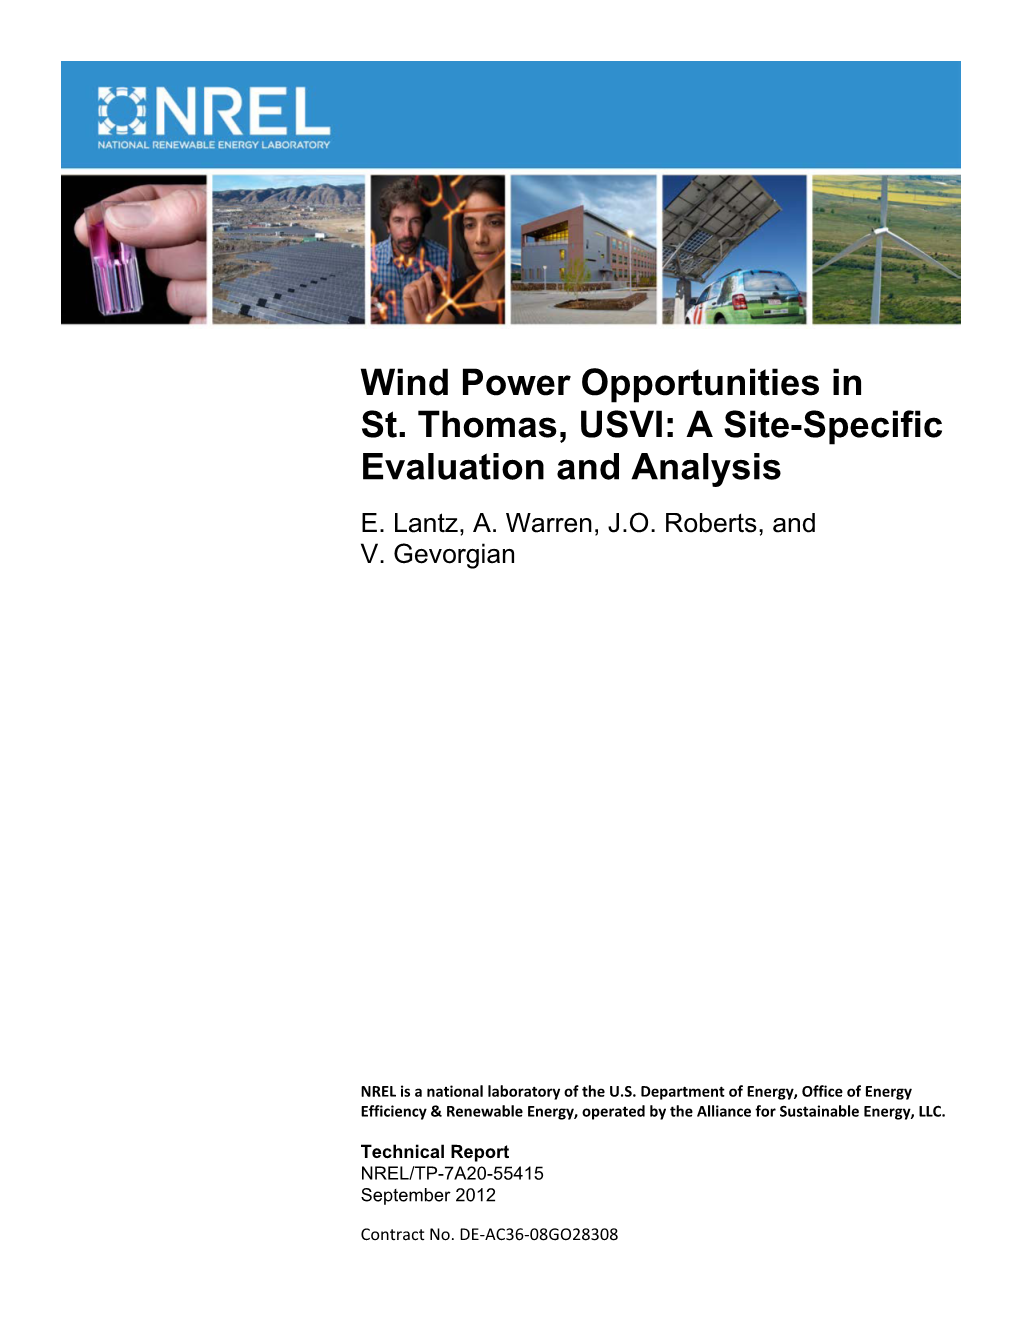 Wind Power Opportunities in St. Thomas, USVI: a Site-Specific Evaluation and Analysis E